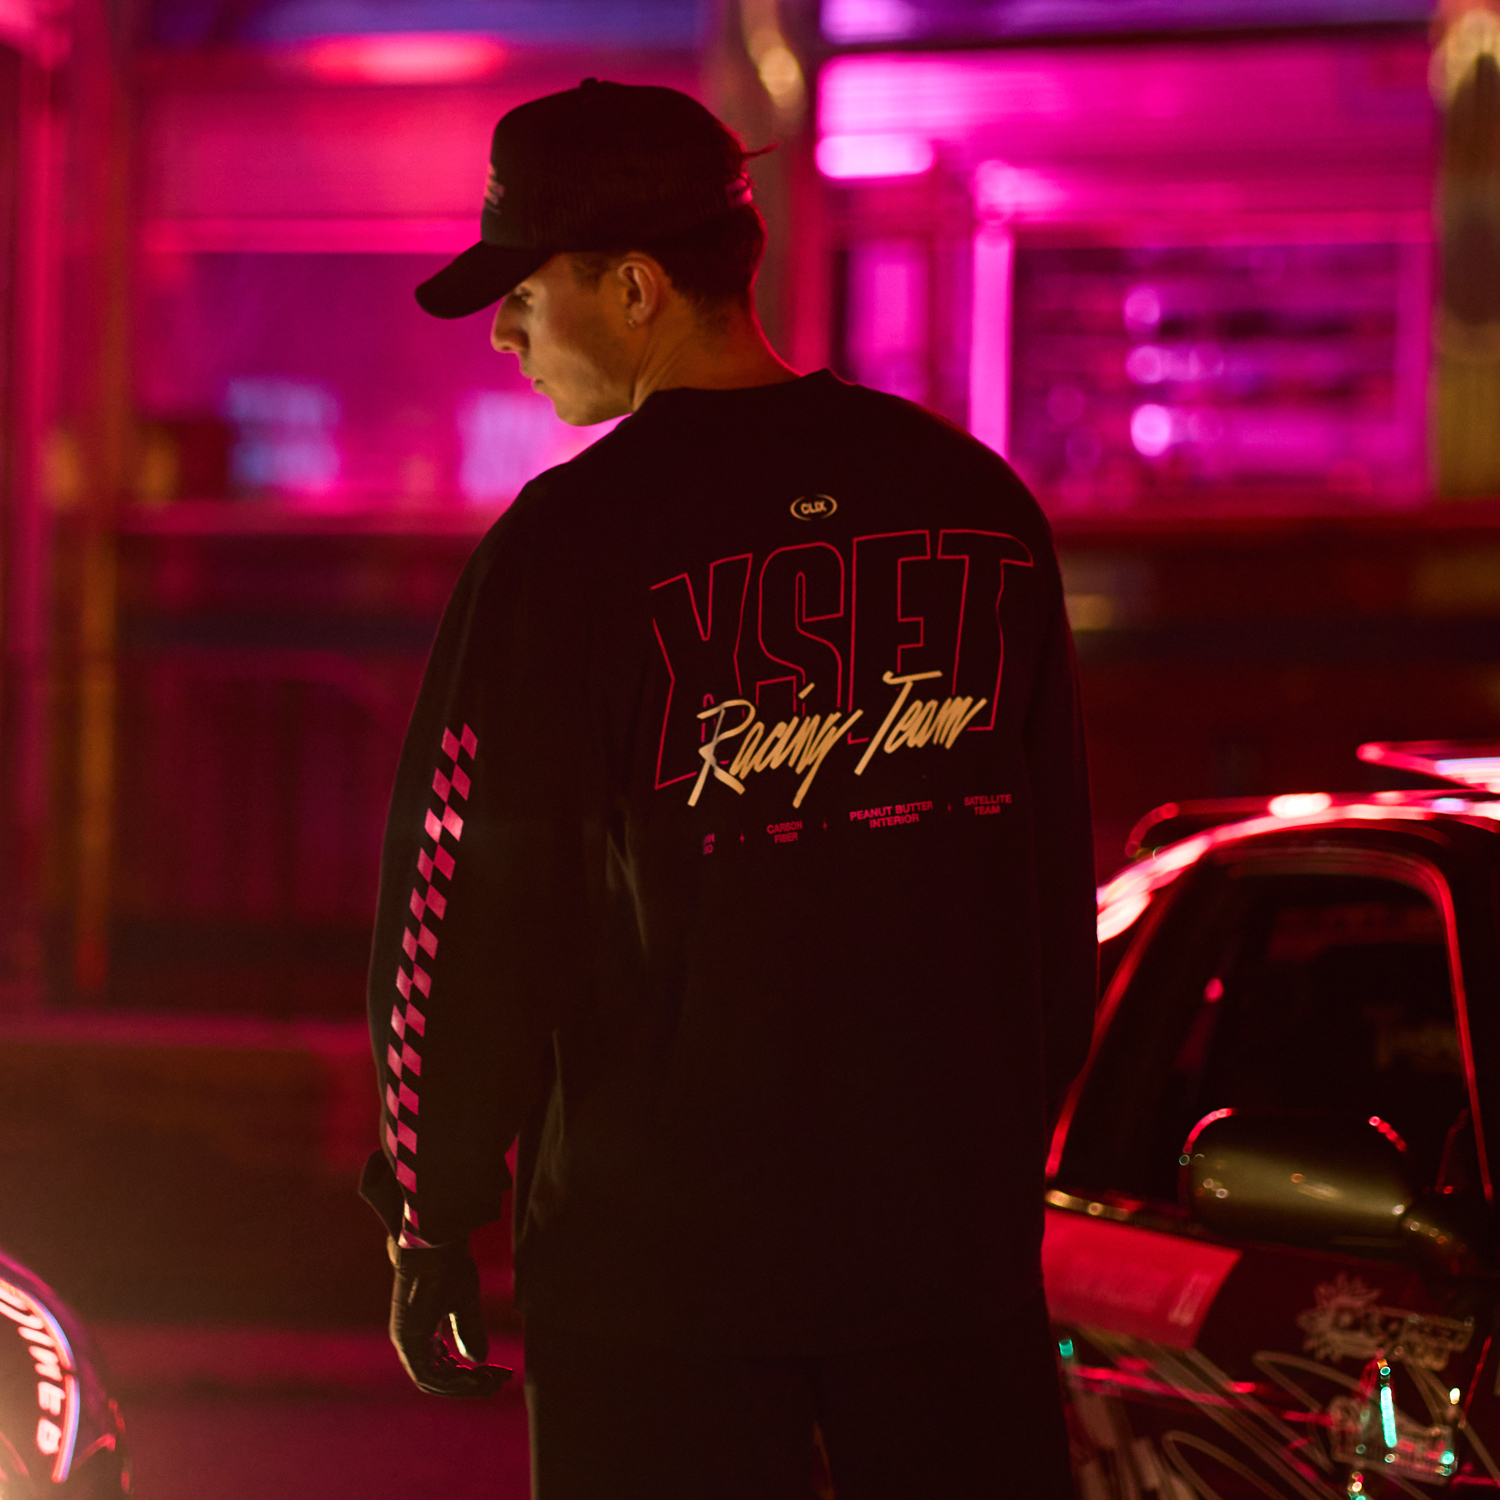 A man in a cap and YSET Racing Team jacket stands near a brightly lit car, with neon lights in the background